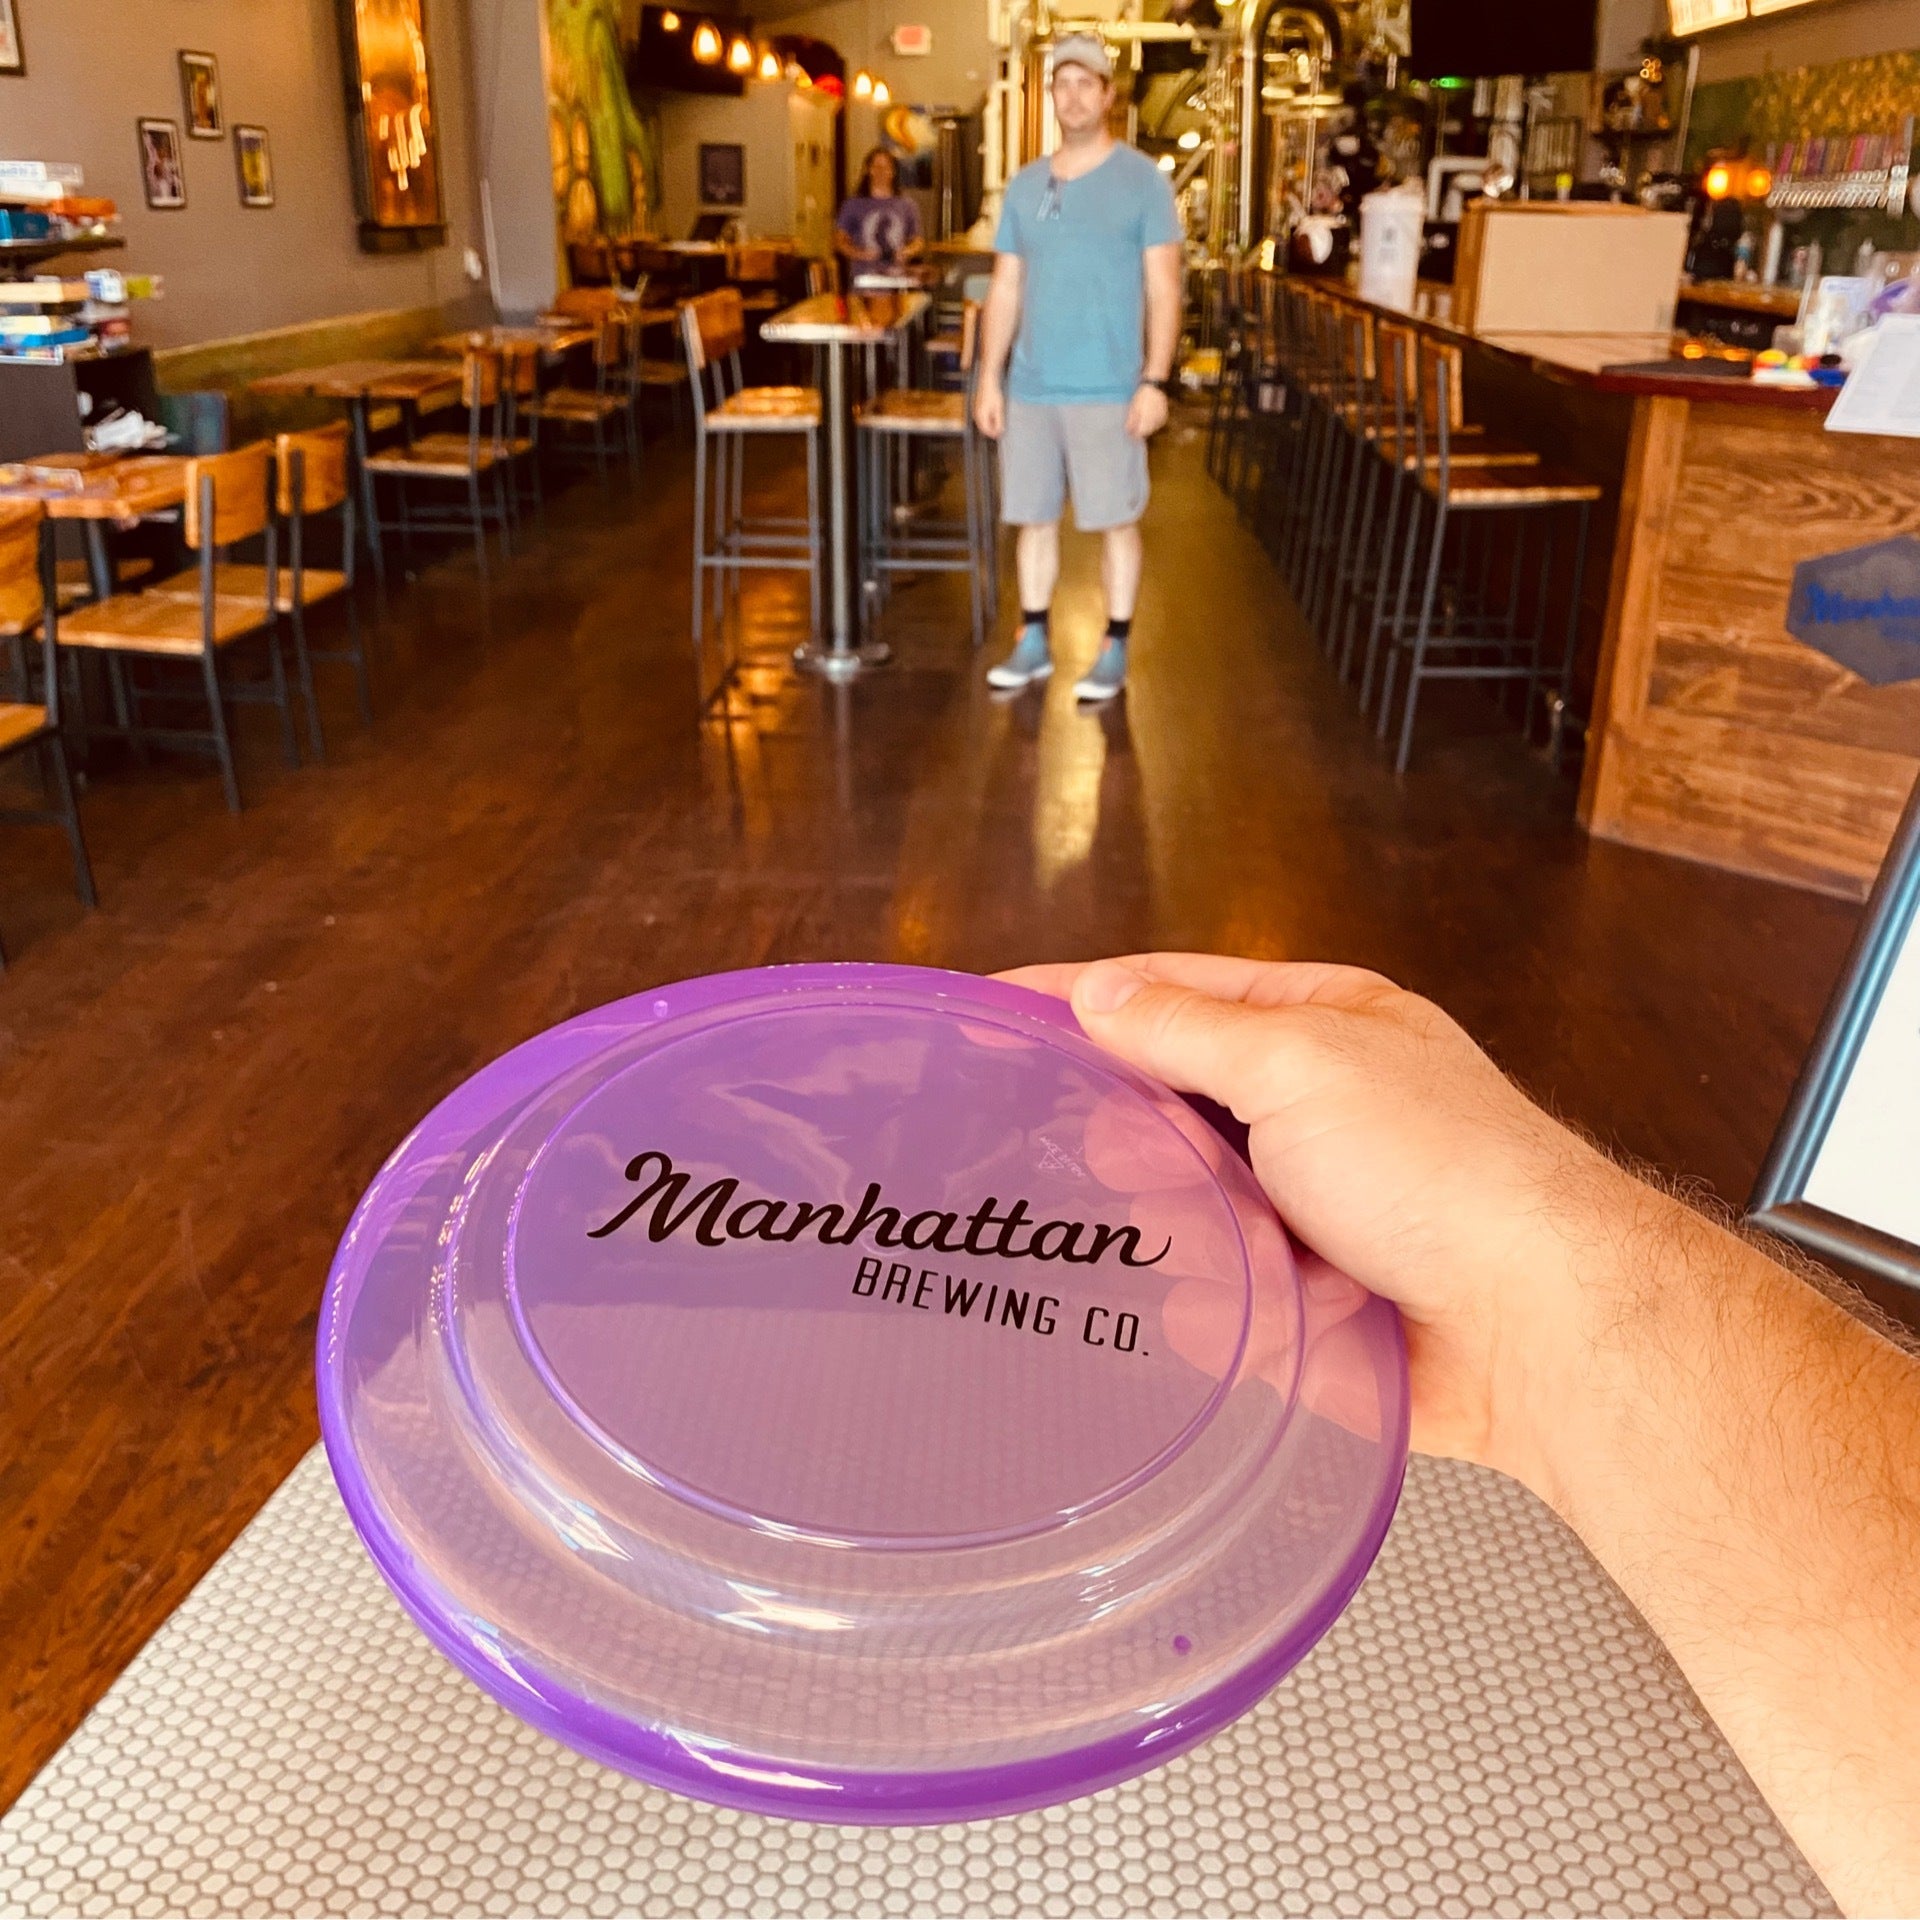 Where Can I Buy a Frisbee in Nyc